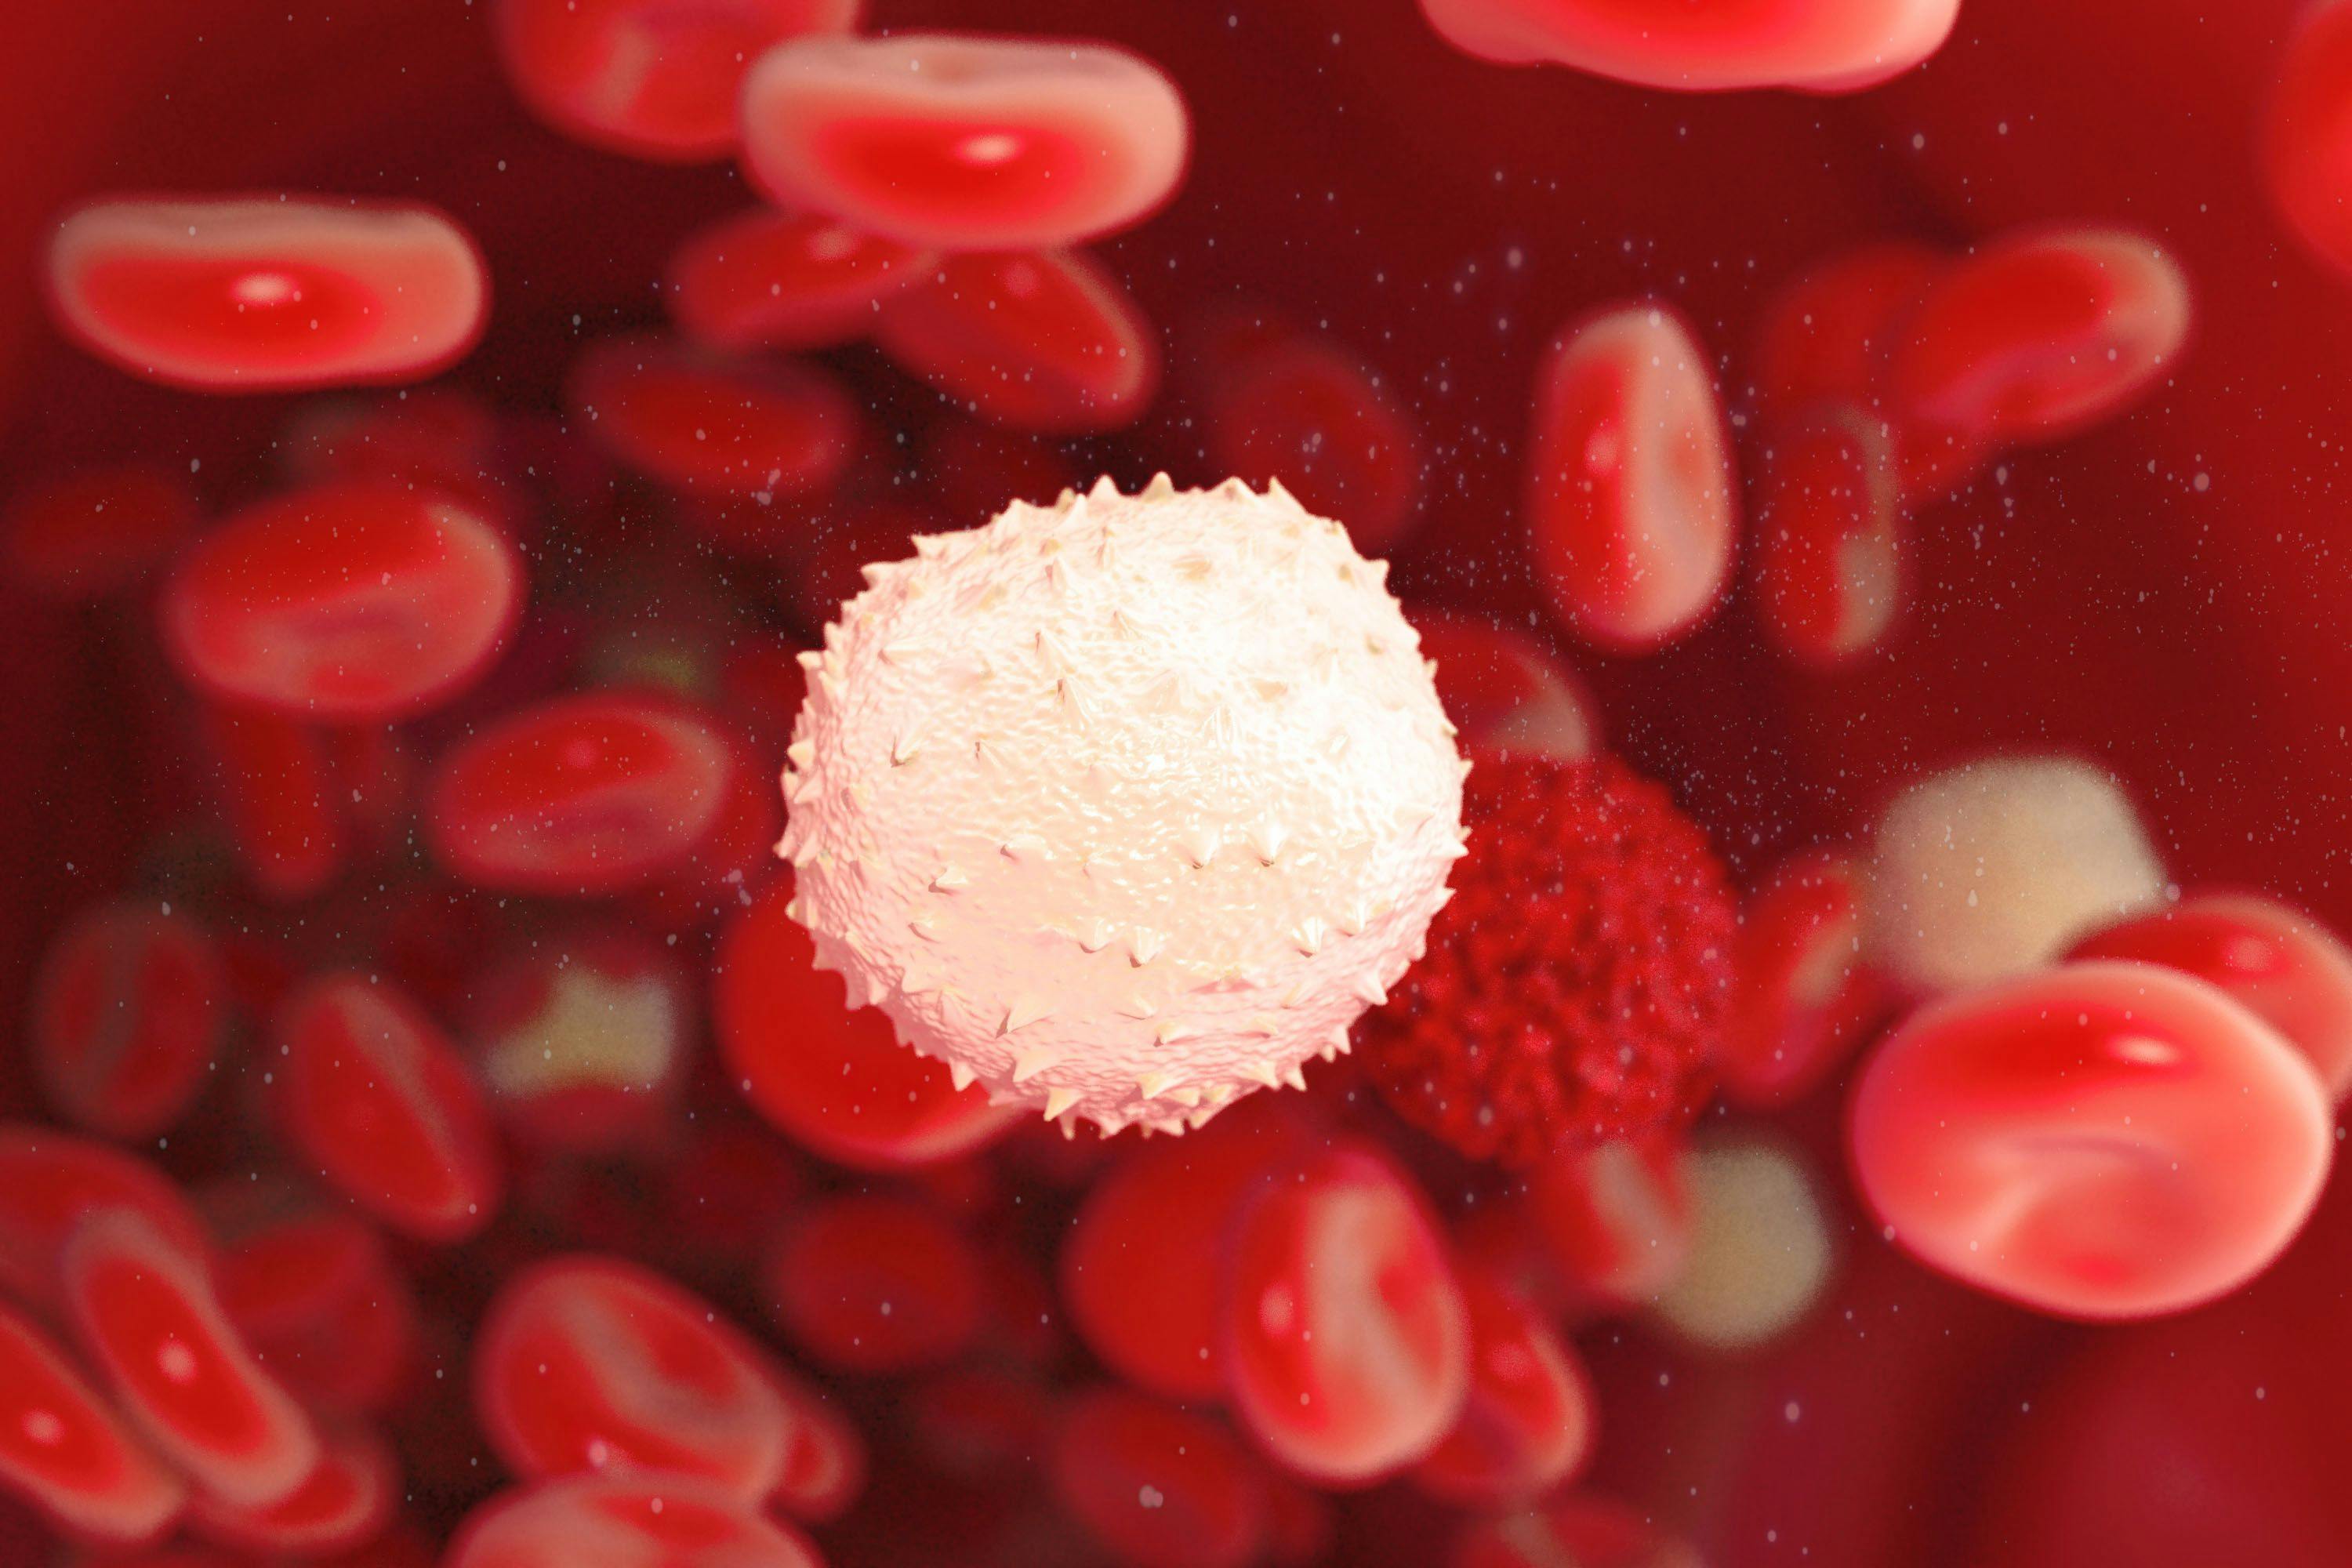 White blood cell | Image Credit: PRB ARTS - stock.adobe.com